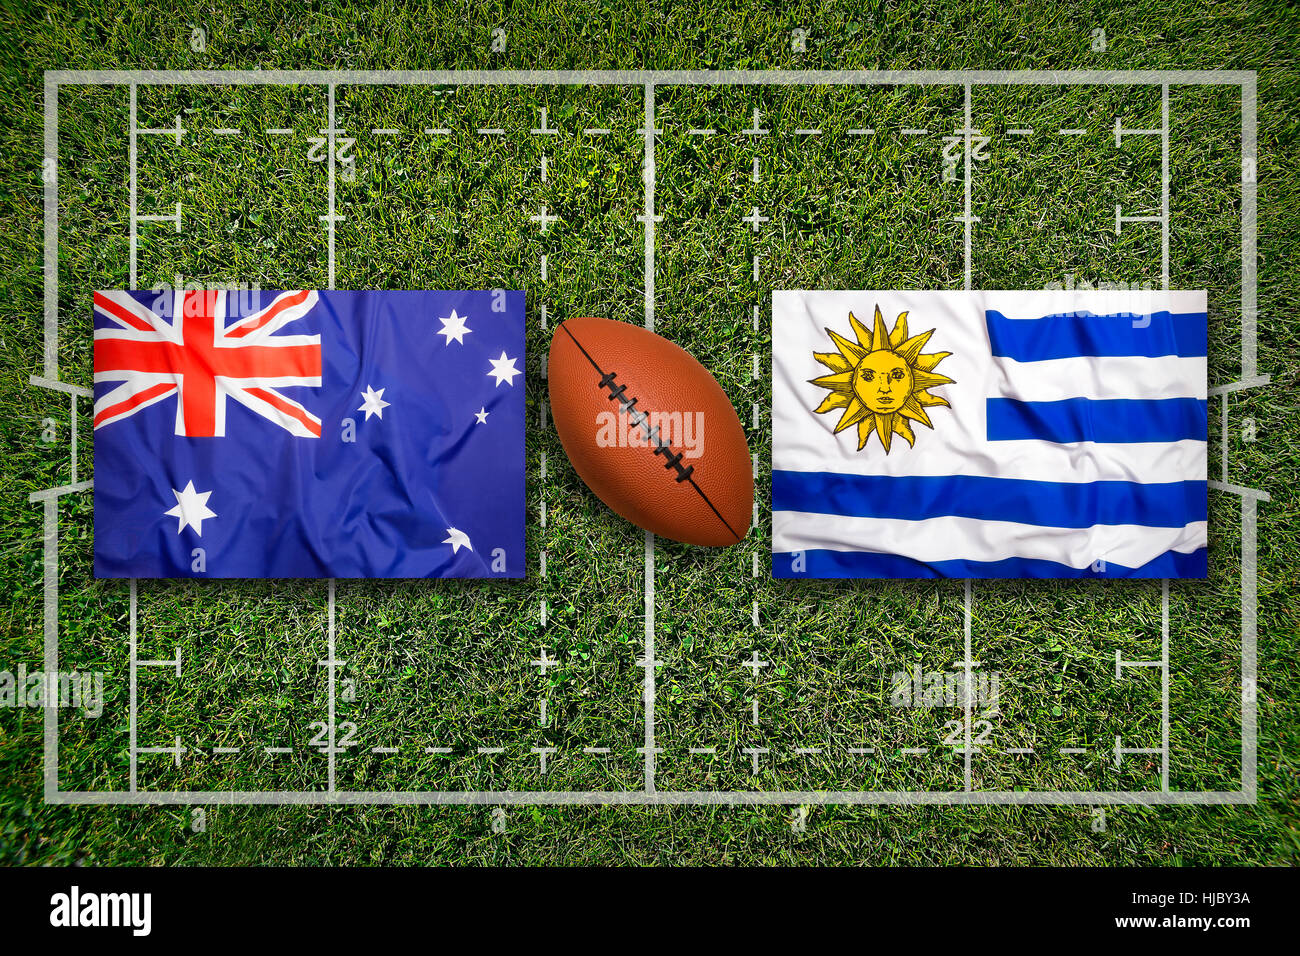 Australia vs. Uruguay flags on green rugby field Stock Photo